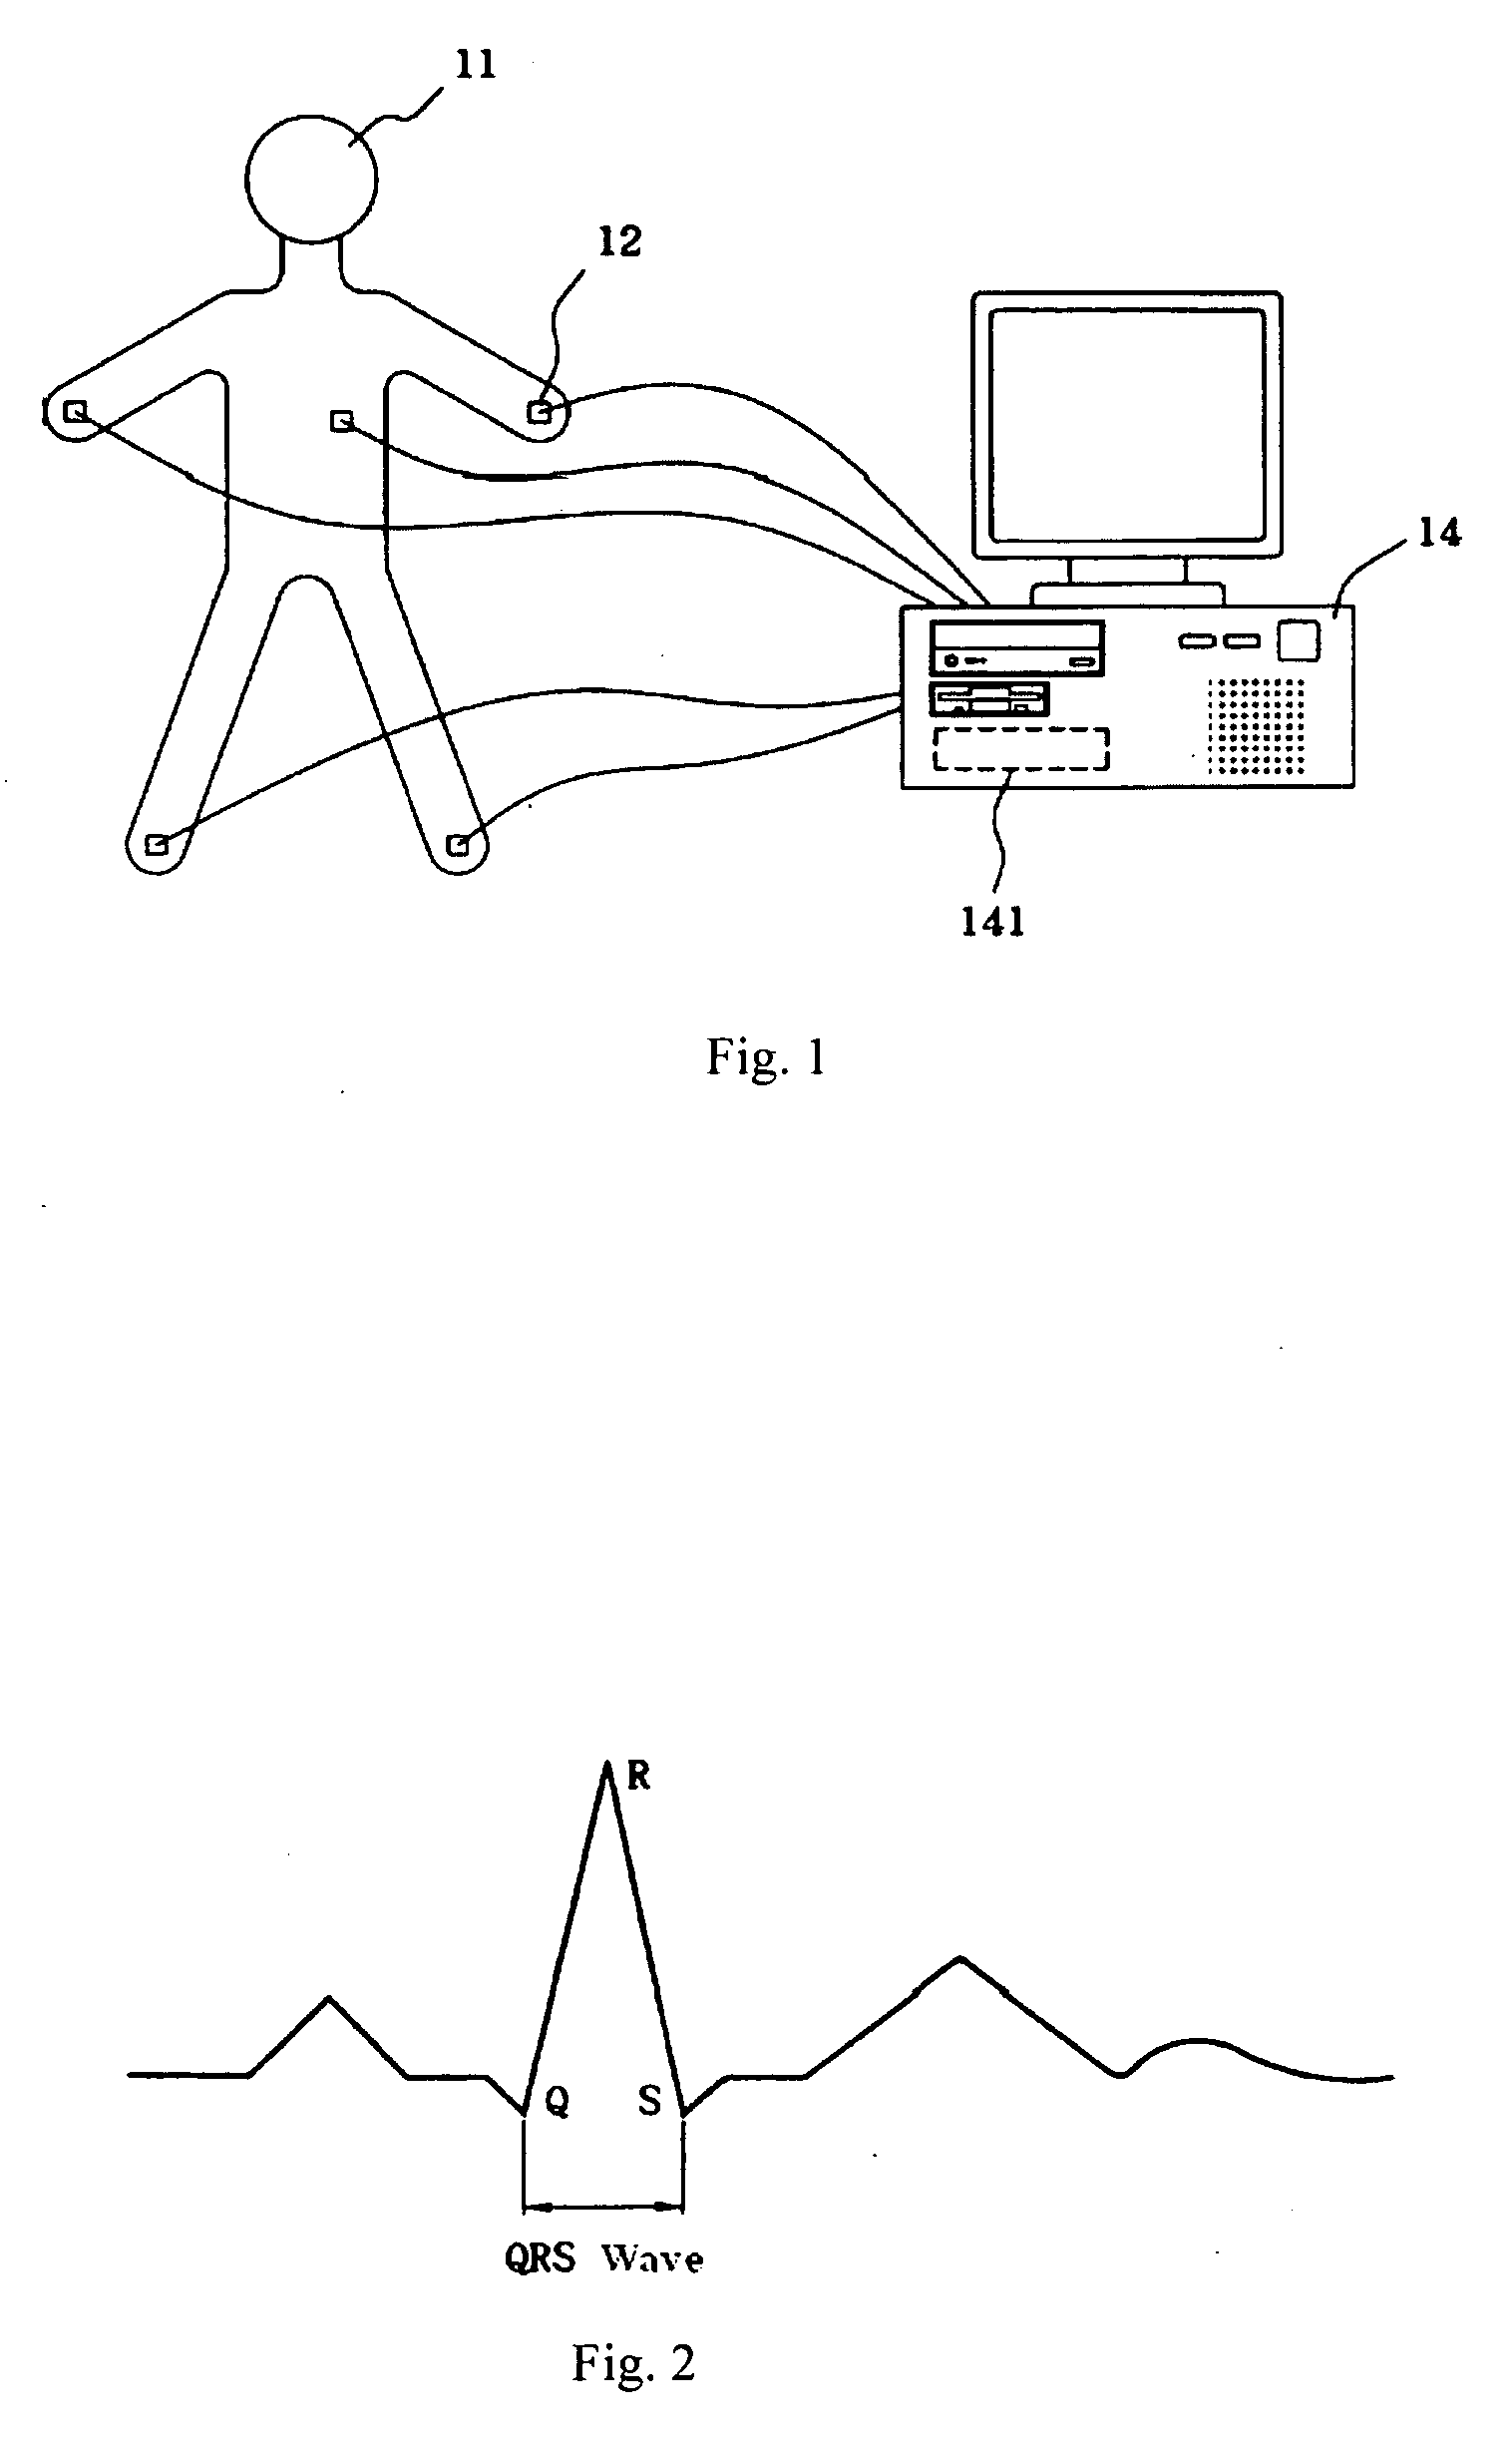 Method and Apparatus for Presenting Heart Rate Variability by Sound and/or Light